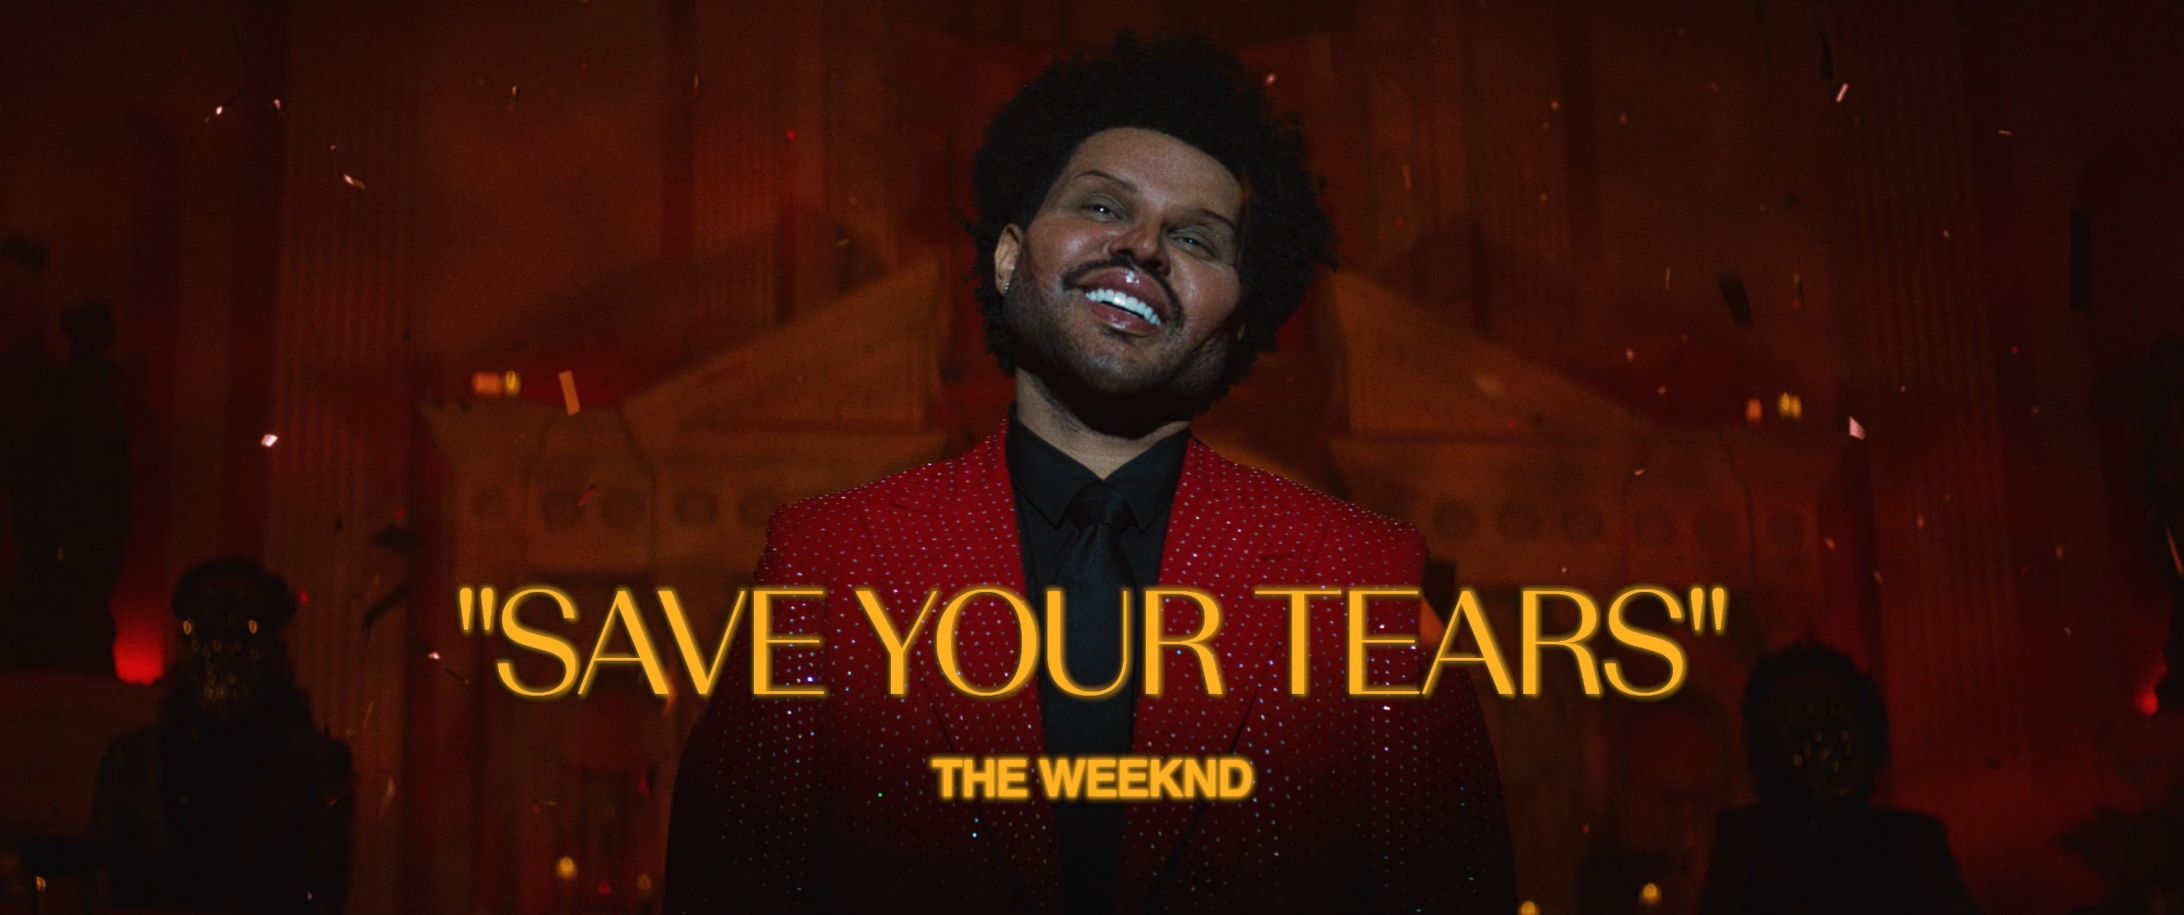 The Weeknd - Save Your Tears 4K.mov_20210511_115052.877